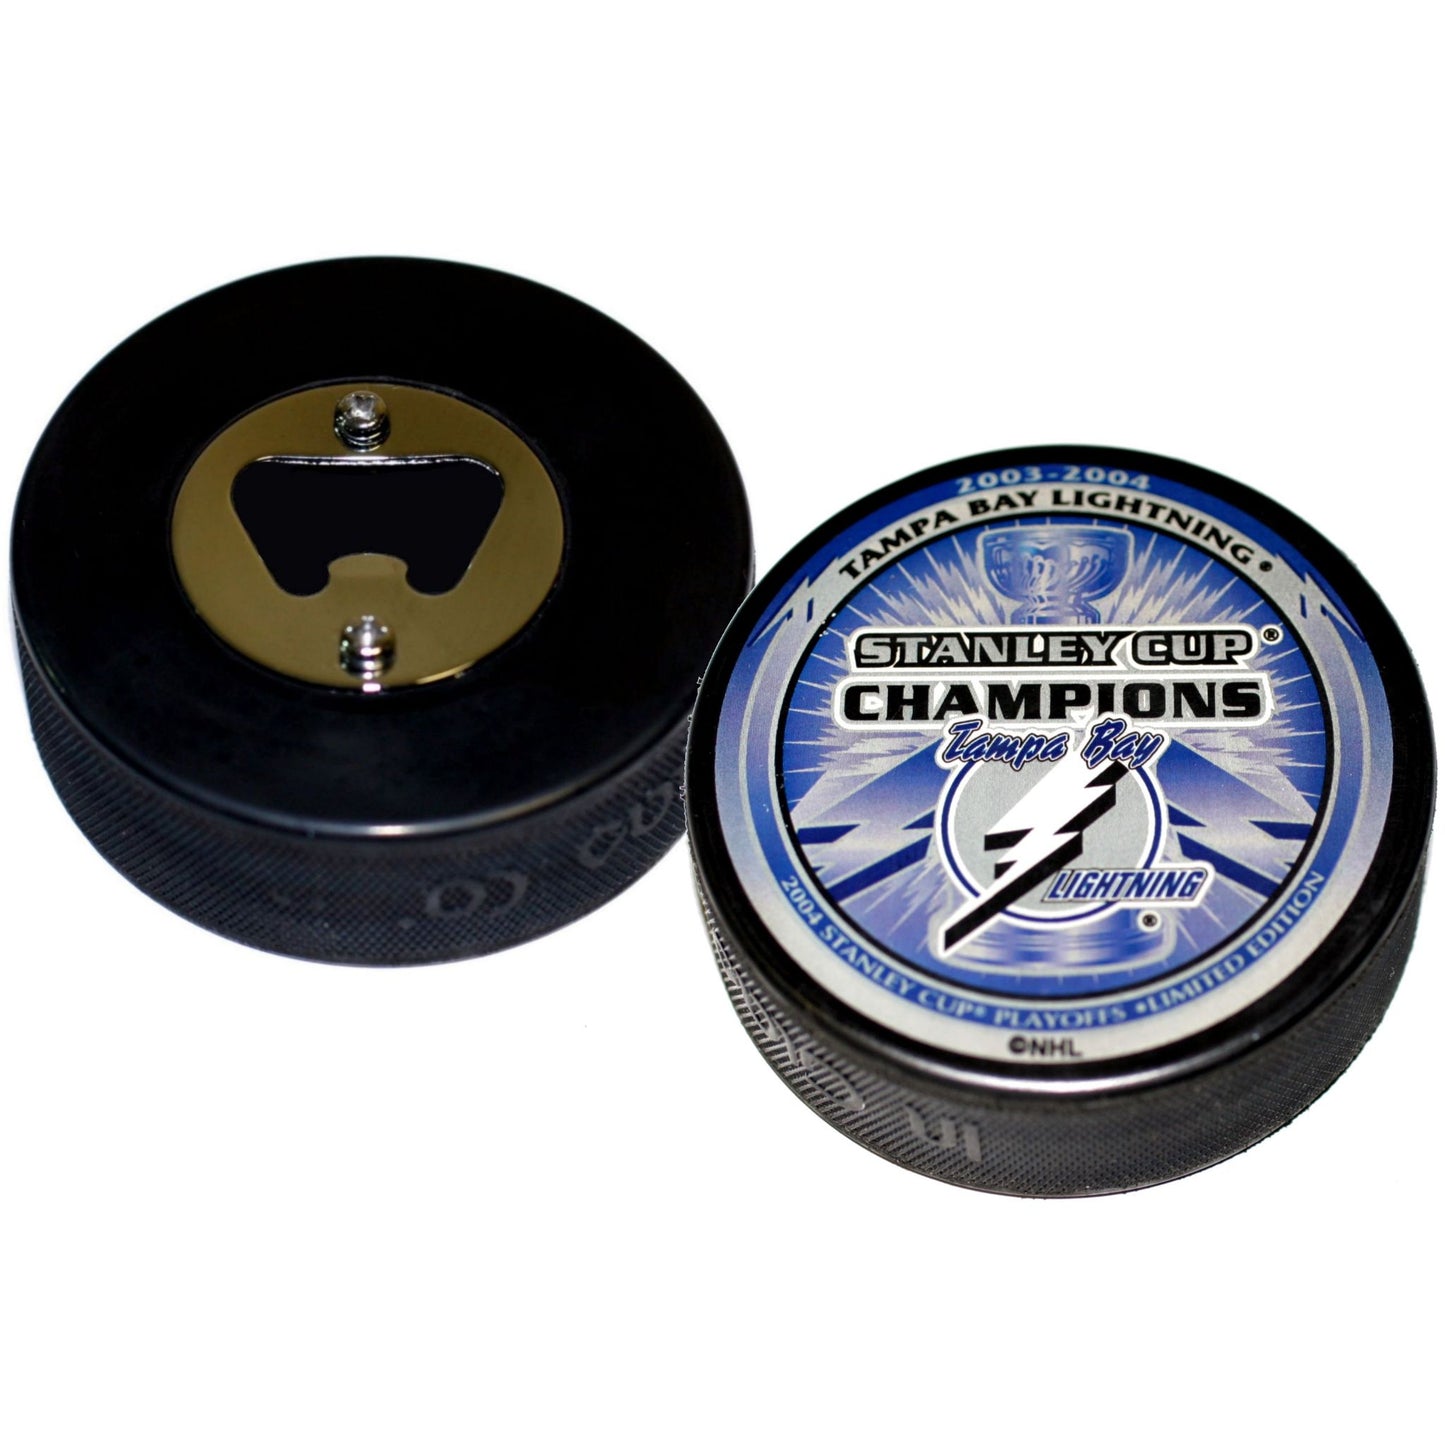 Tampa Bay Lightning 2004 Stanley Cup Champions Hockey Puck Bottle Opener